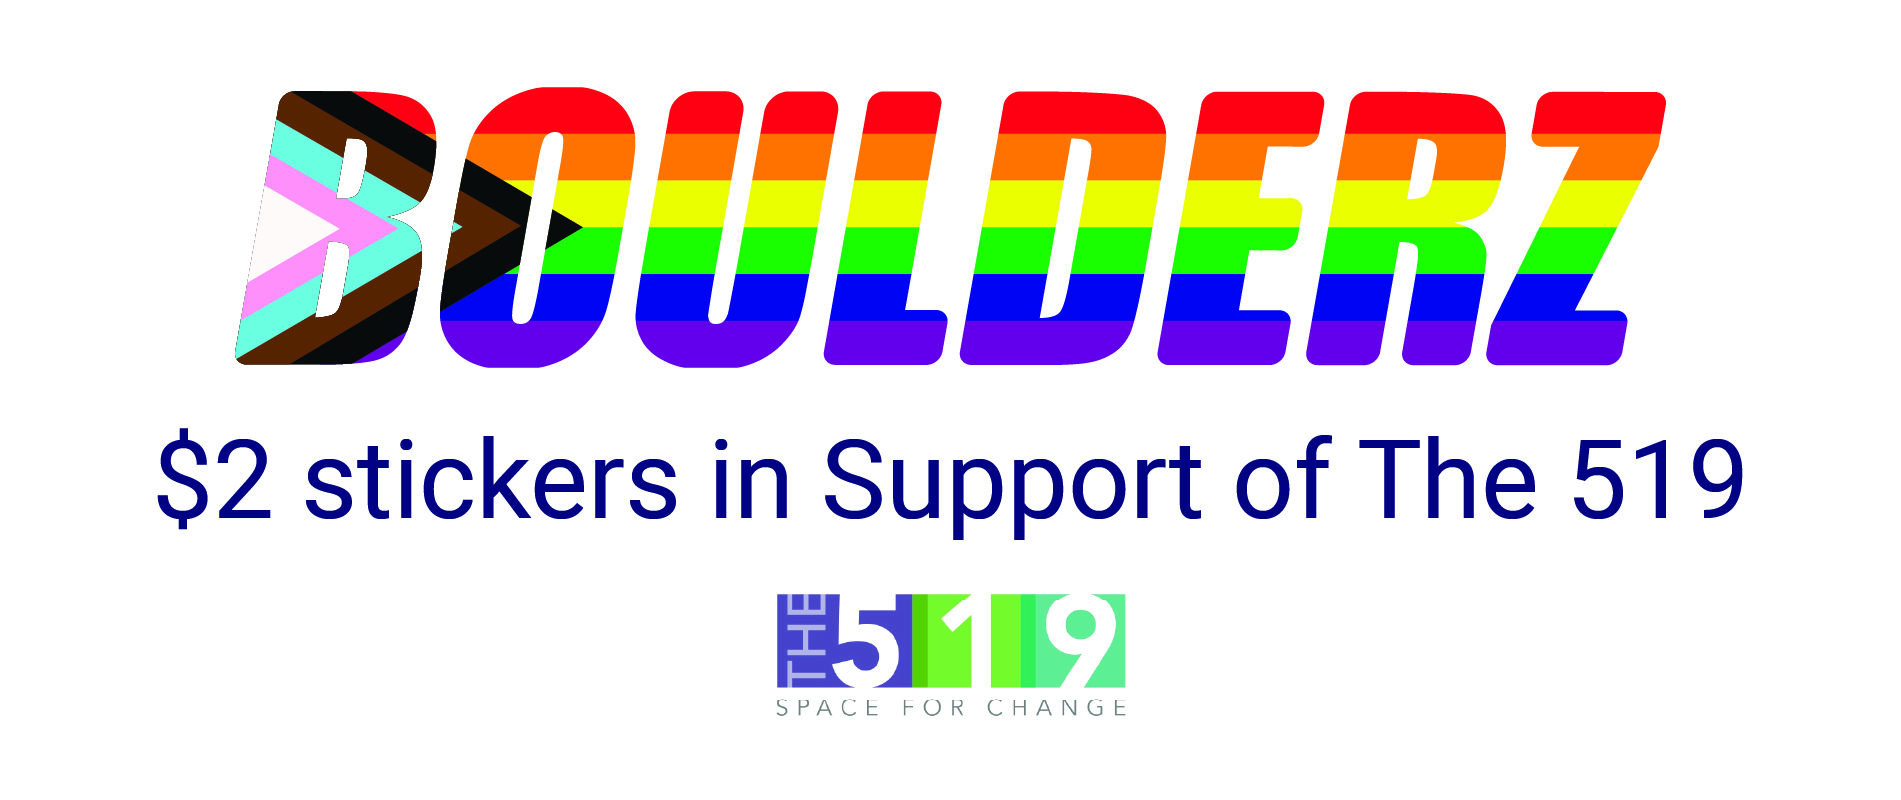 Boulderz logo with progressive pride flag superimposed behind the text. Text &quot;$2 stickers in Support of 519. Image of the 519 logo